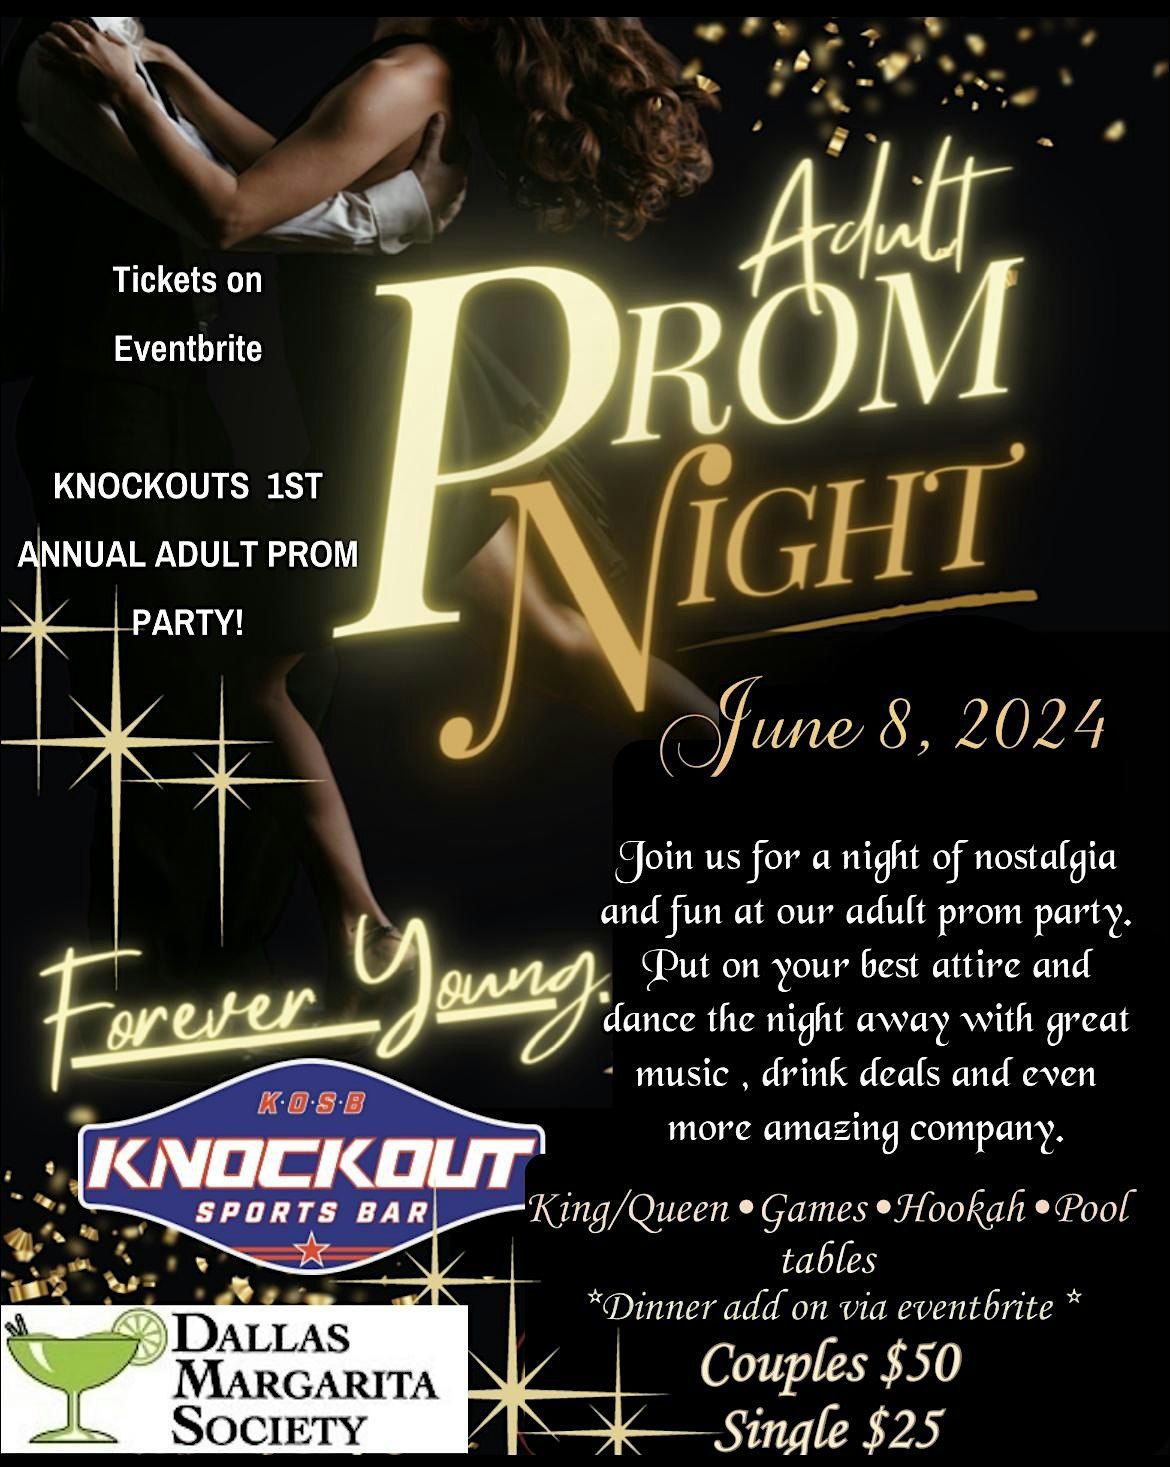 KNOCKOUTS  1ST ANNUAL ADULT PROM PARTY!